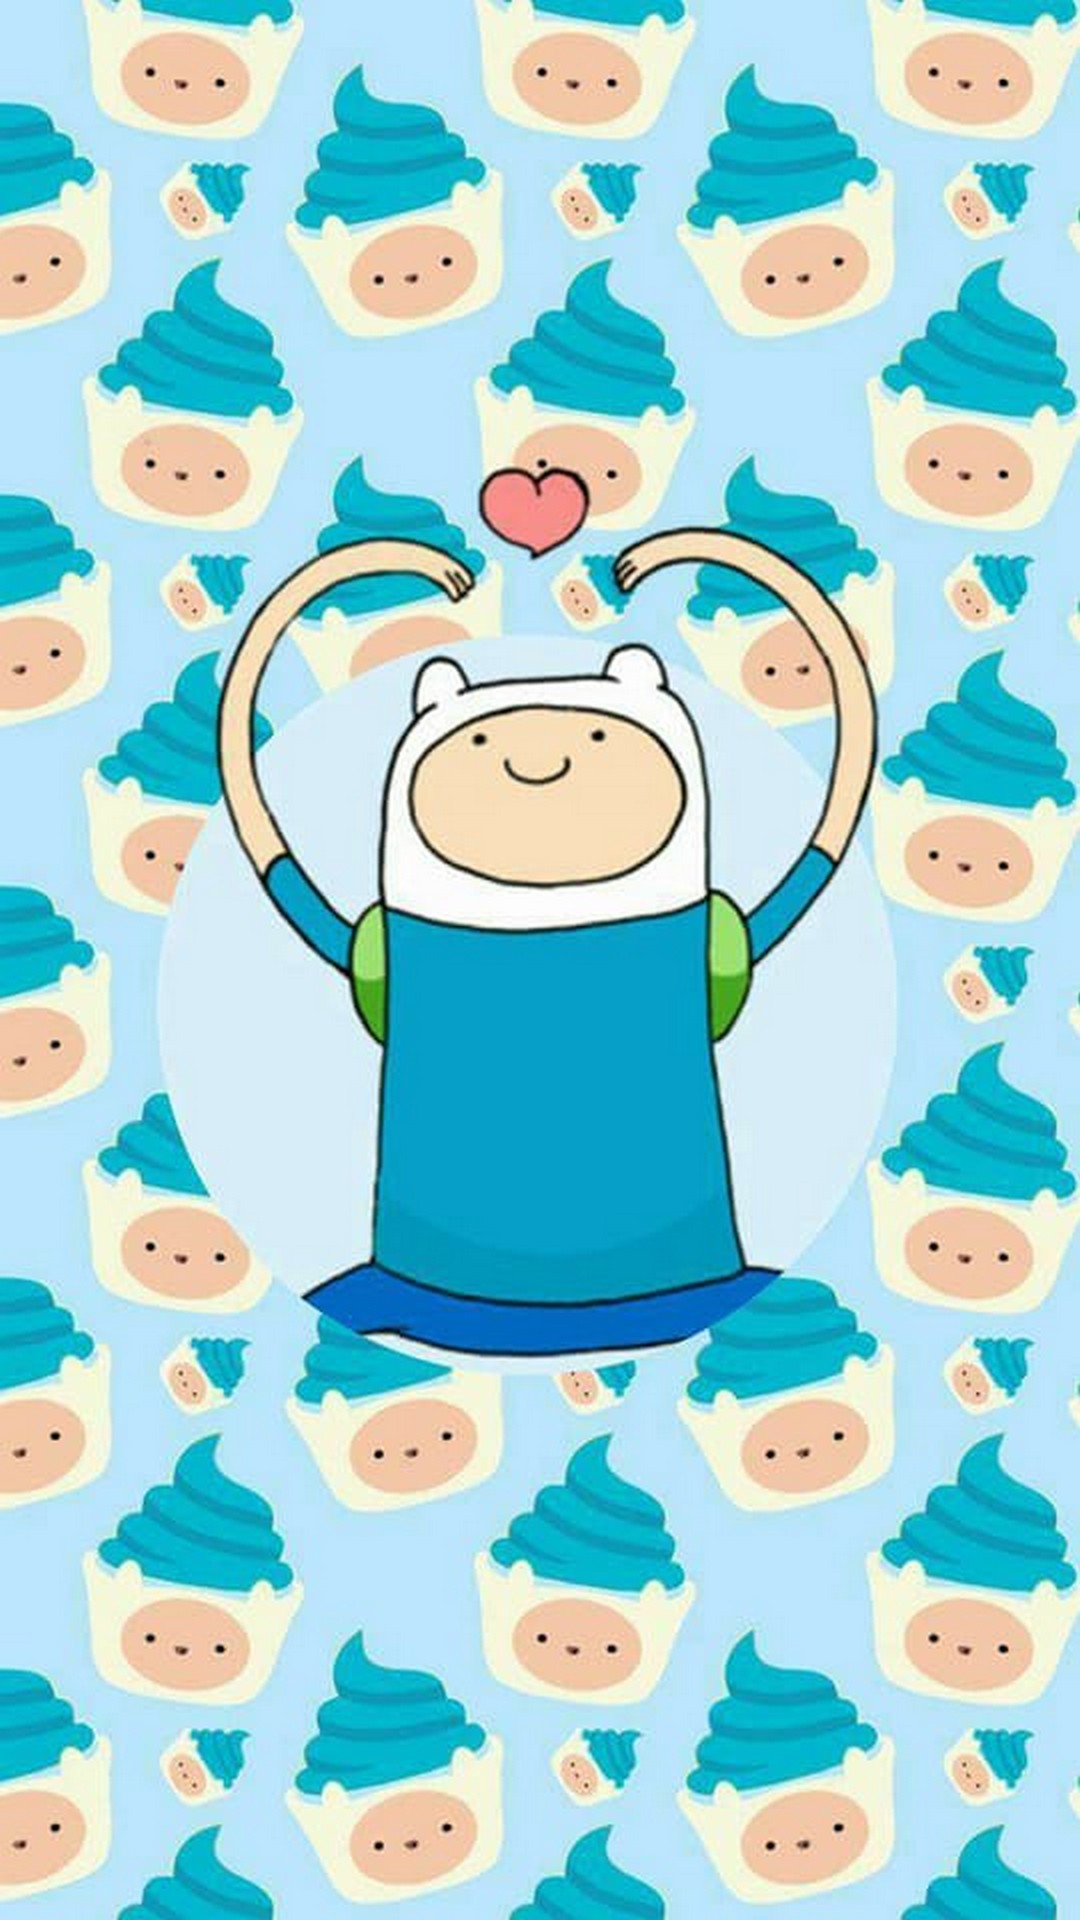 Wallpaper Adventure Time Iphone With Image Resolution - Adventure Time Wallpaper Iphone - HD Wallpaper 